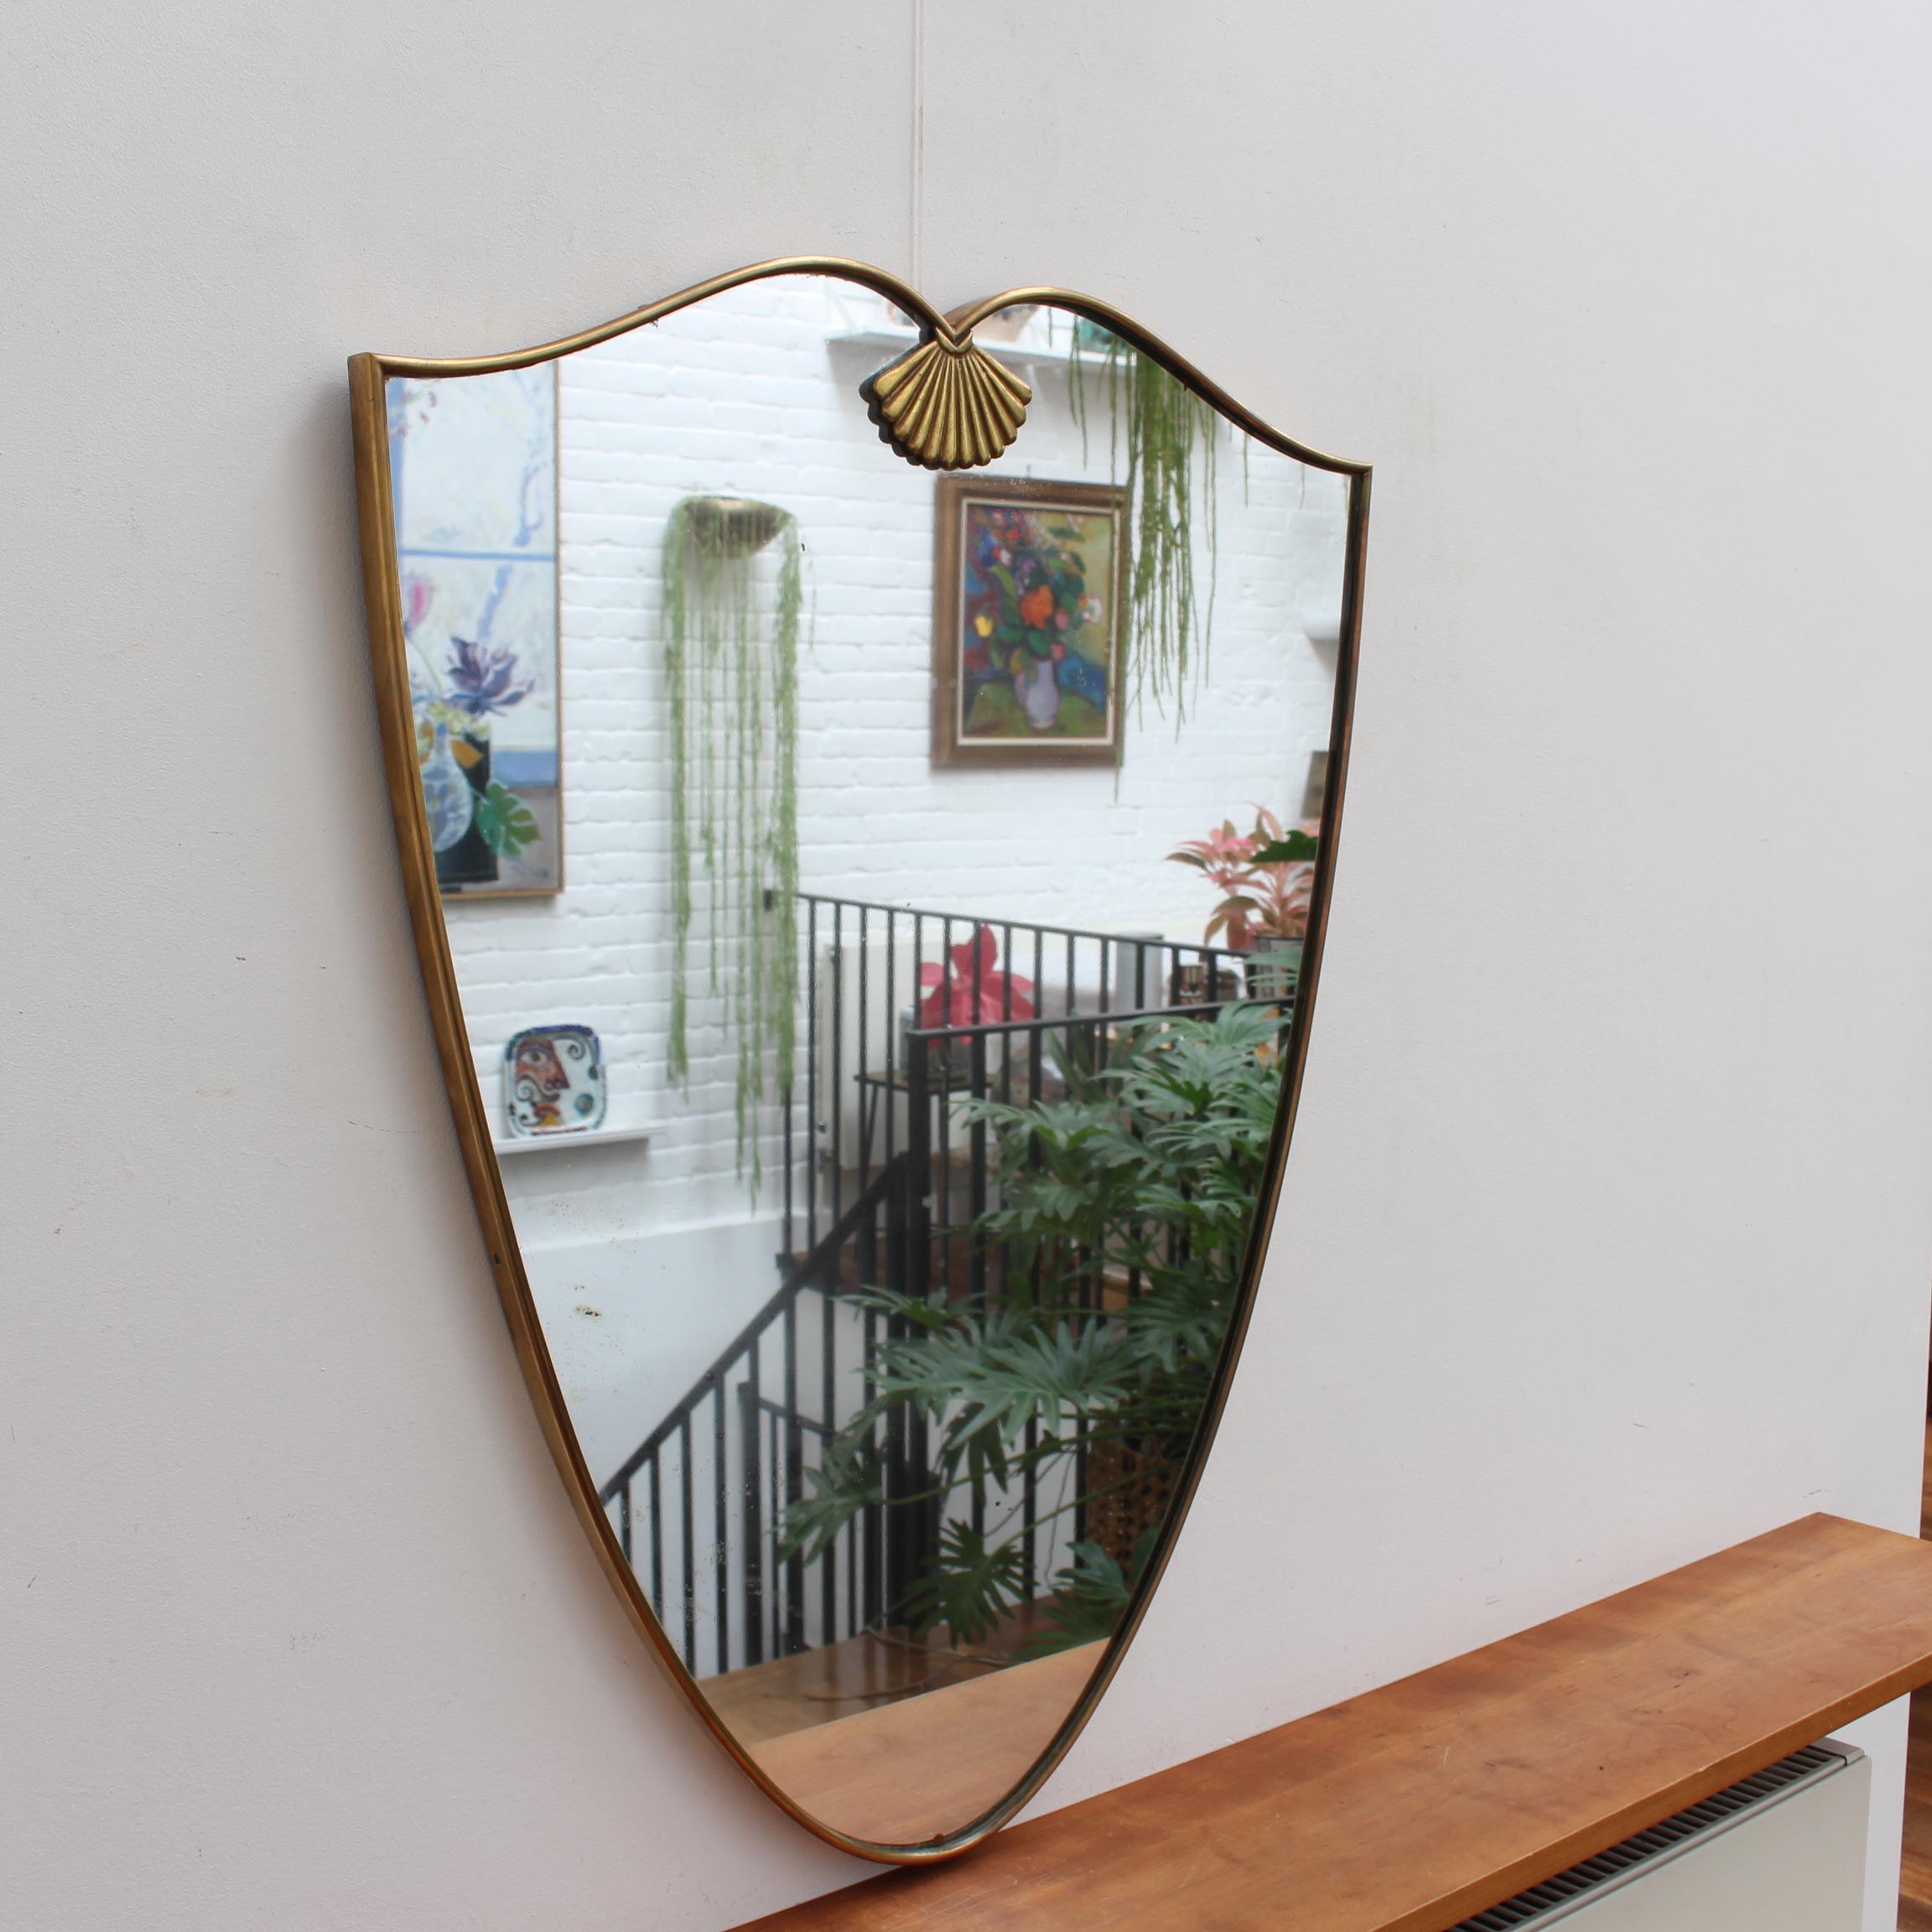 Vintage Italian wall mirror with brass frame (circa 1960s). The mirror is a unique shape with a rare seashell or fan feature which delights the viewer as an unexpected surprise. Always classically elegant in a modern Gio Ponti style. The piece is in